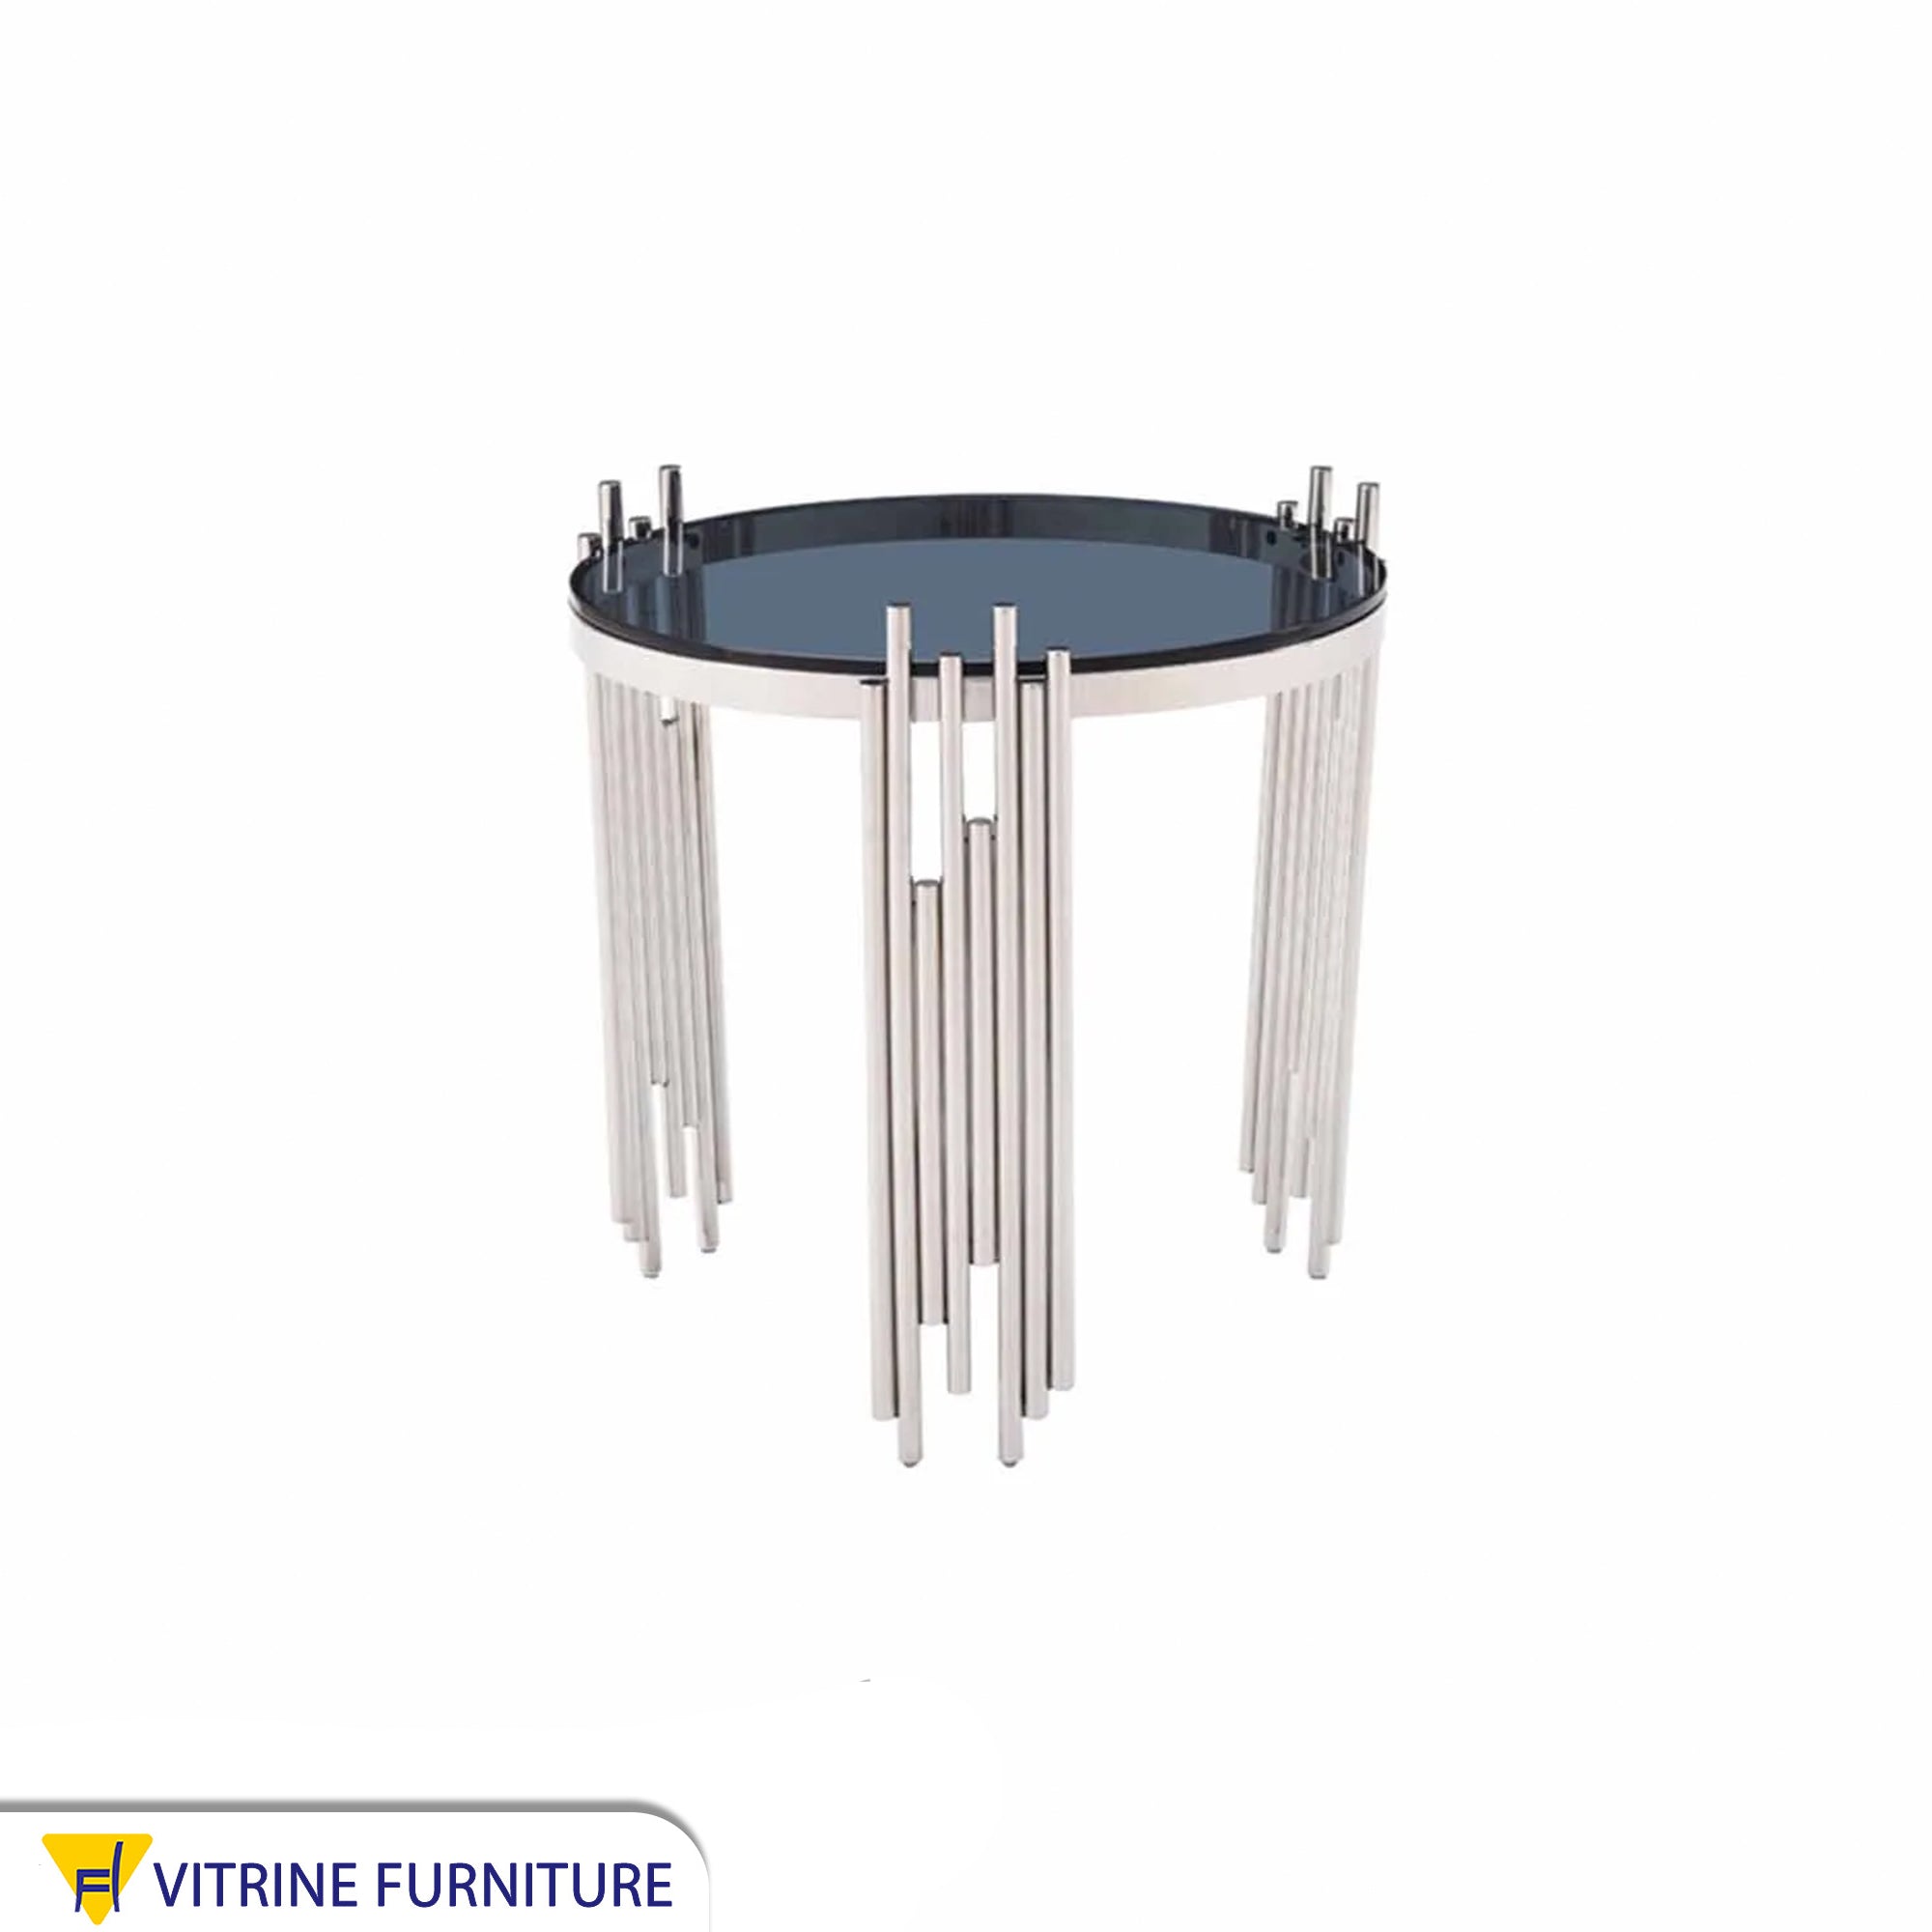 Silver table with modern design